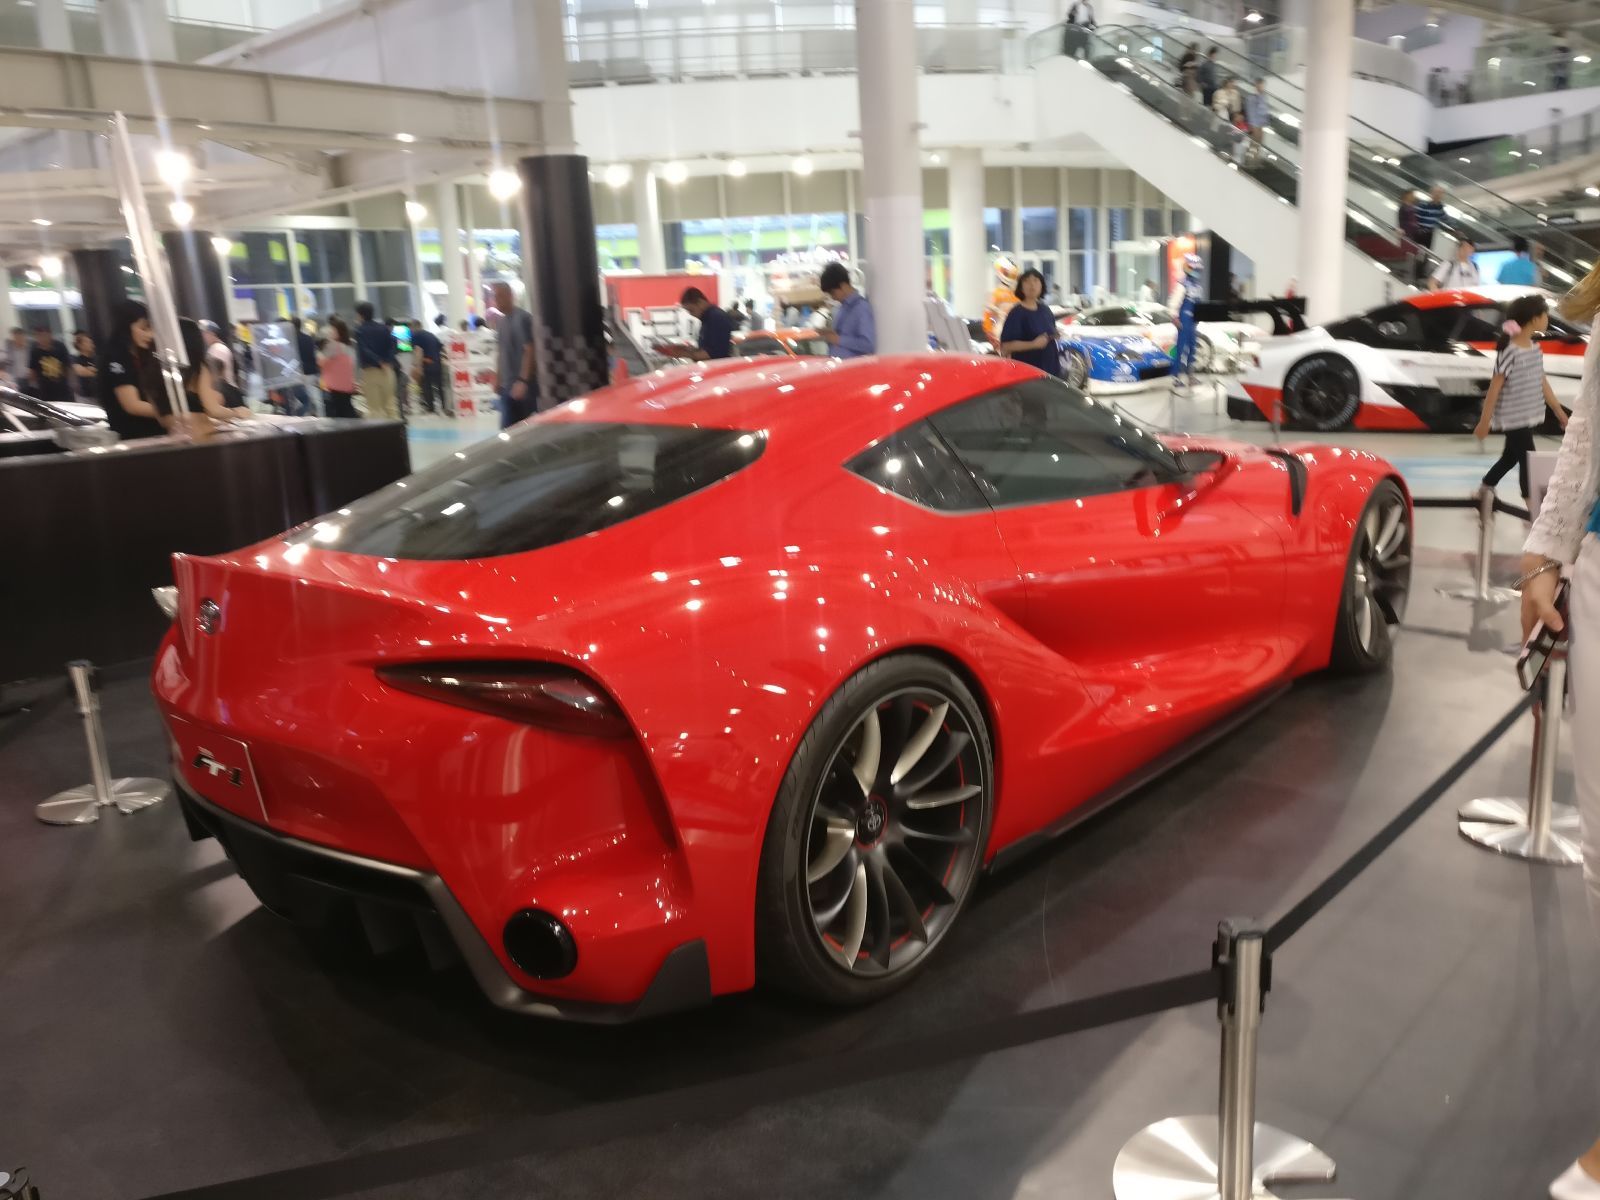 I’m a sucker for seeing actual concept cars in the flesh. This is the FT-1